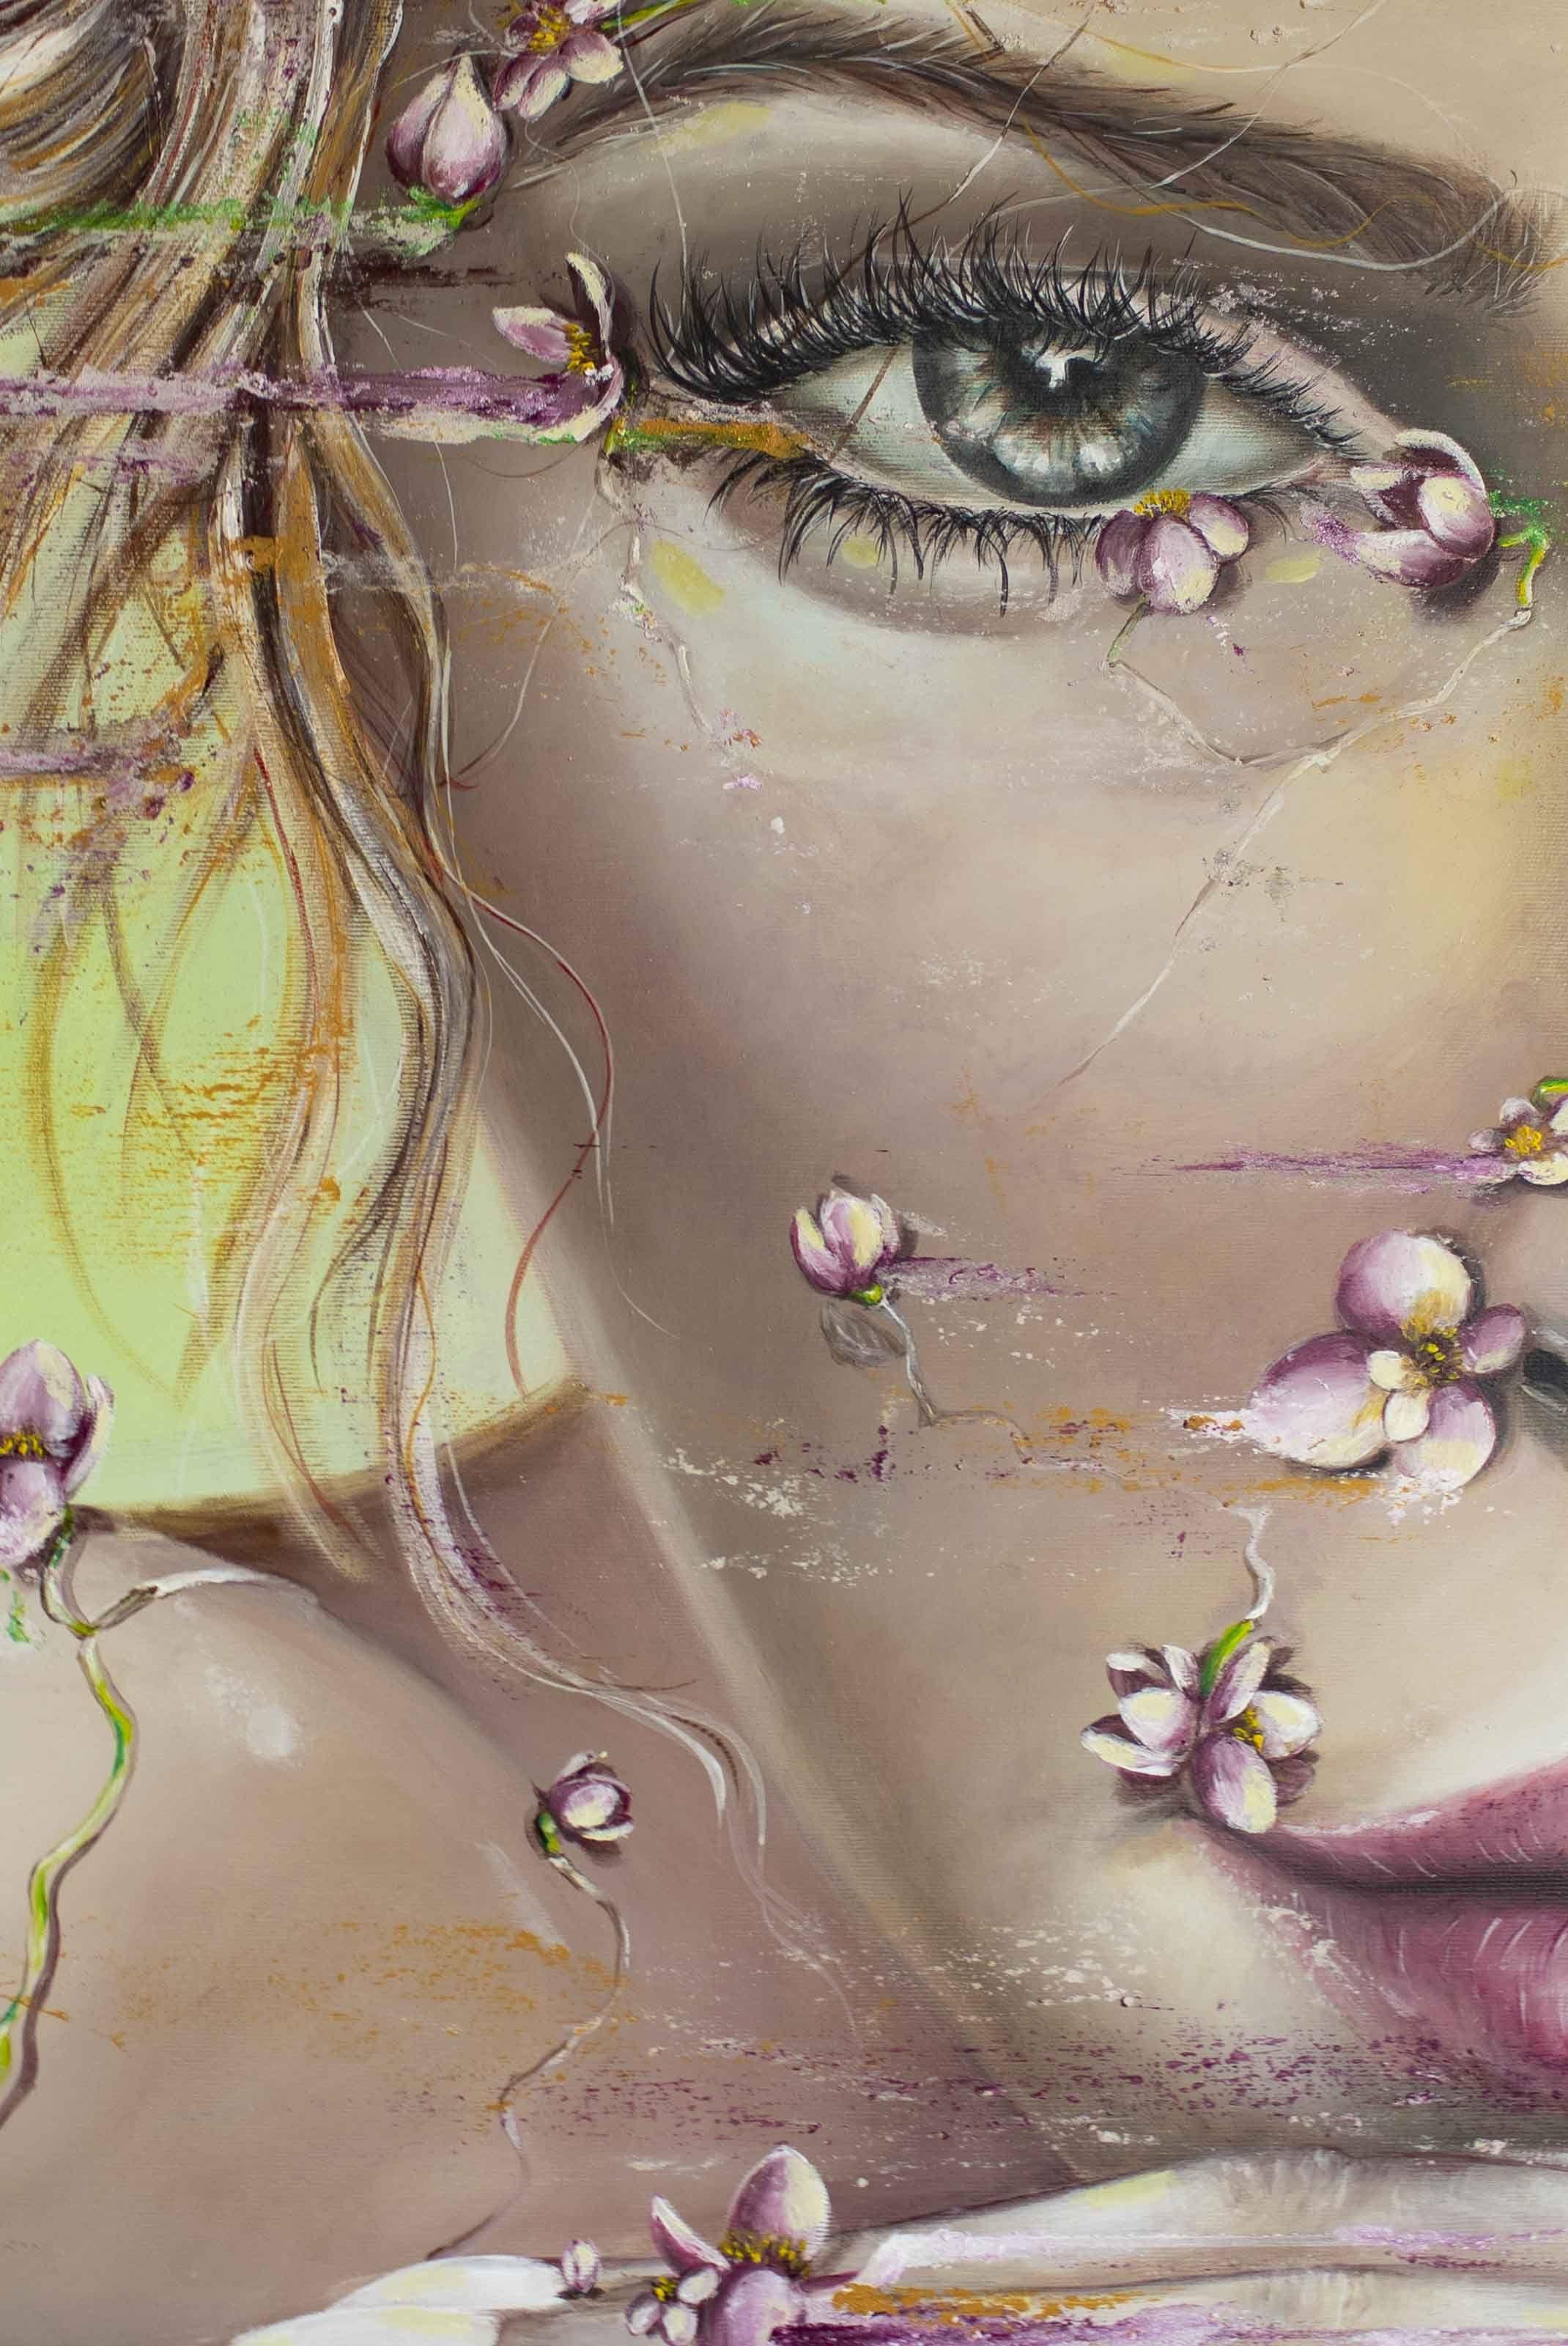 Where You Touched Me... Flowers Bloomed.   The painting represents a woman and her feelings. It makes us think about our actions and how they affect others.  :: Painting :: Photorealism :: This piece comes with an official certificate of